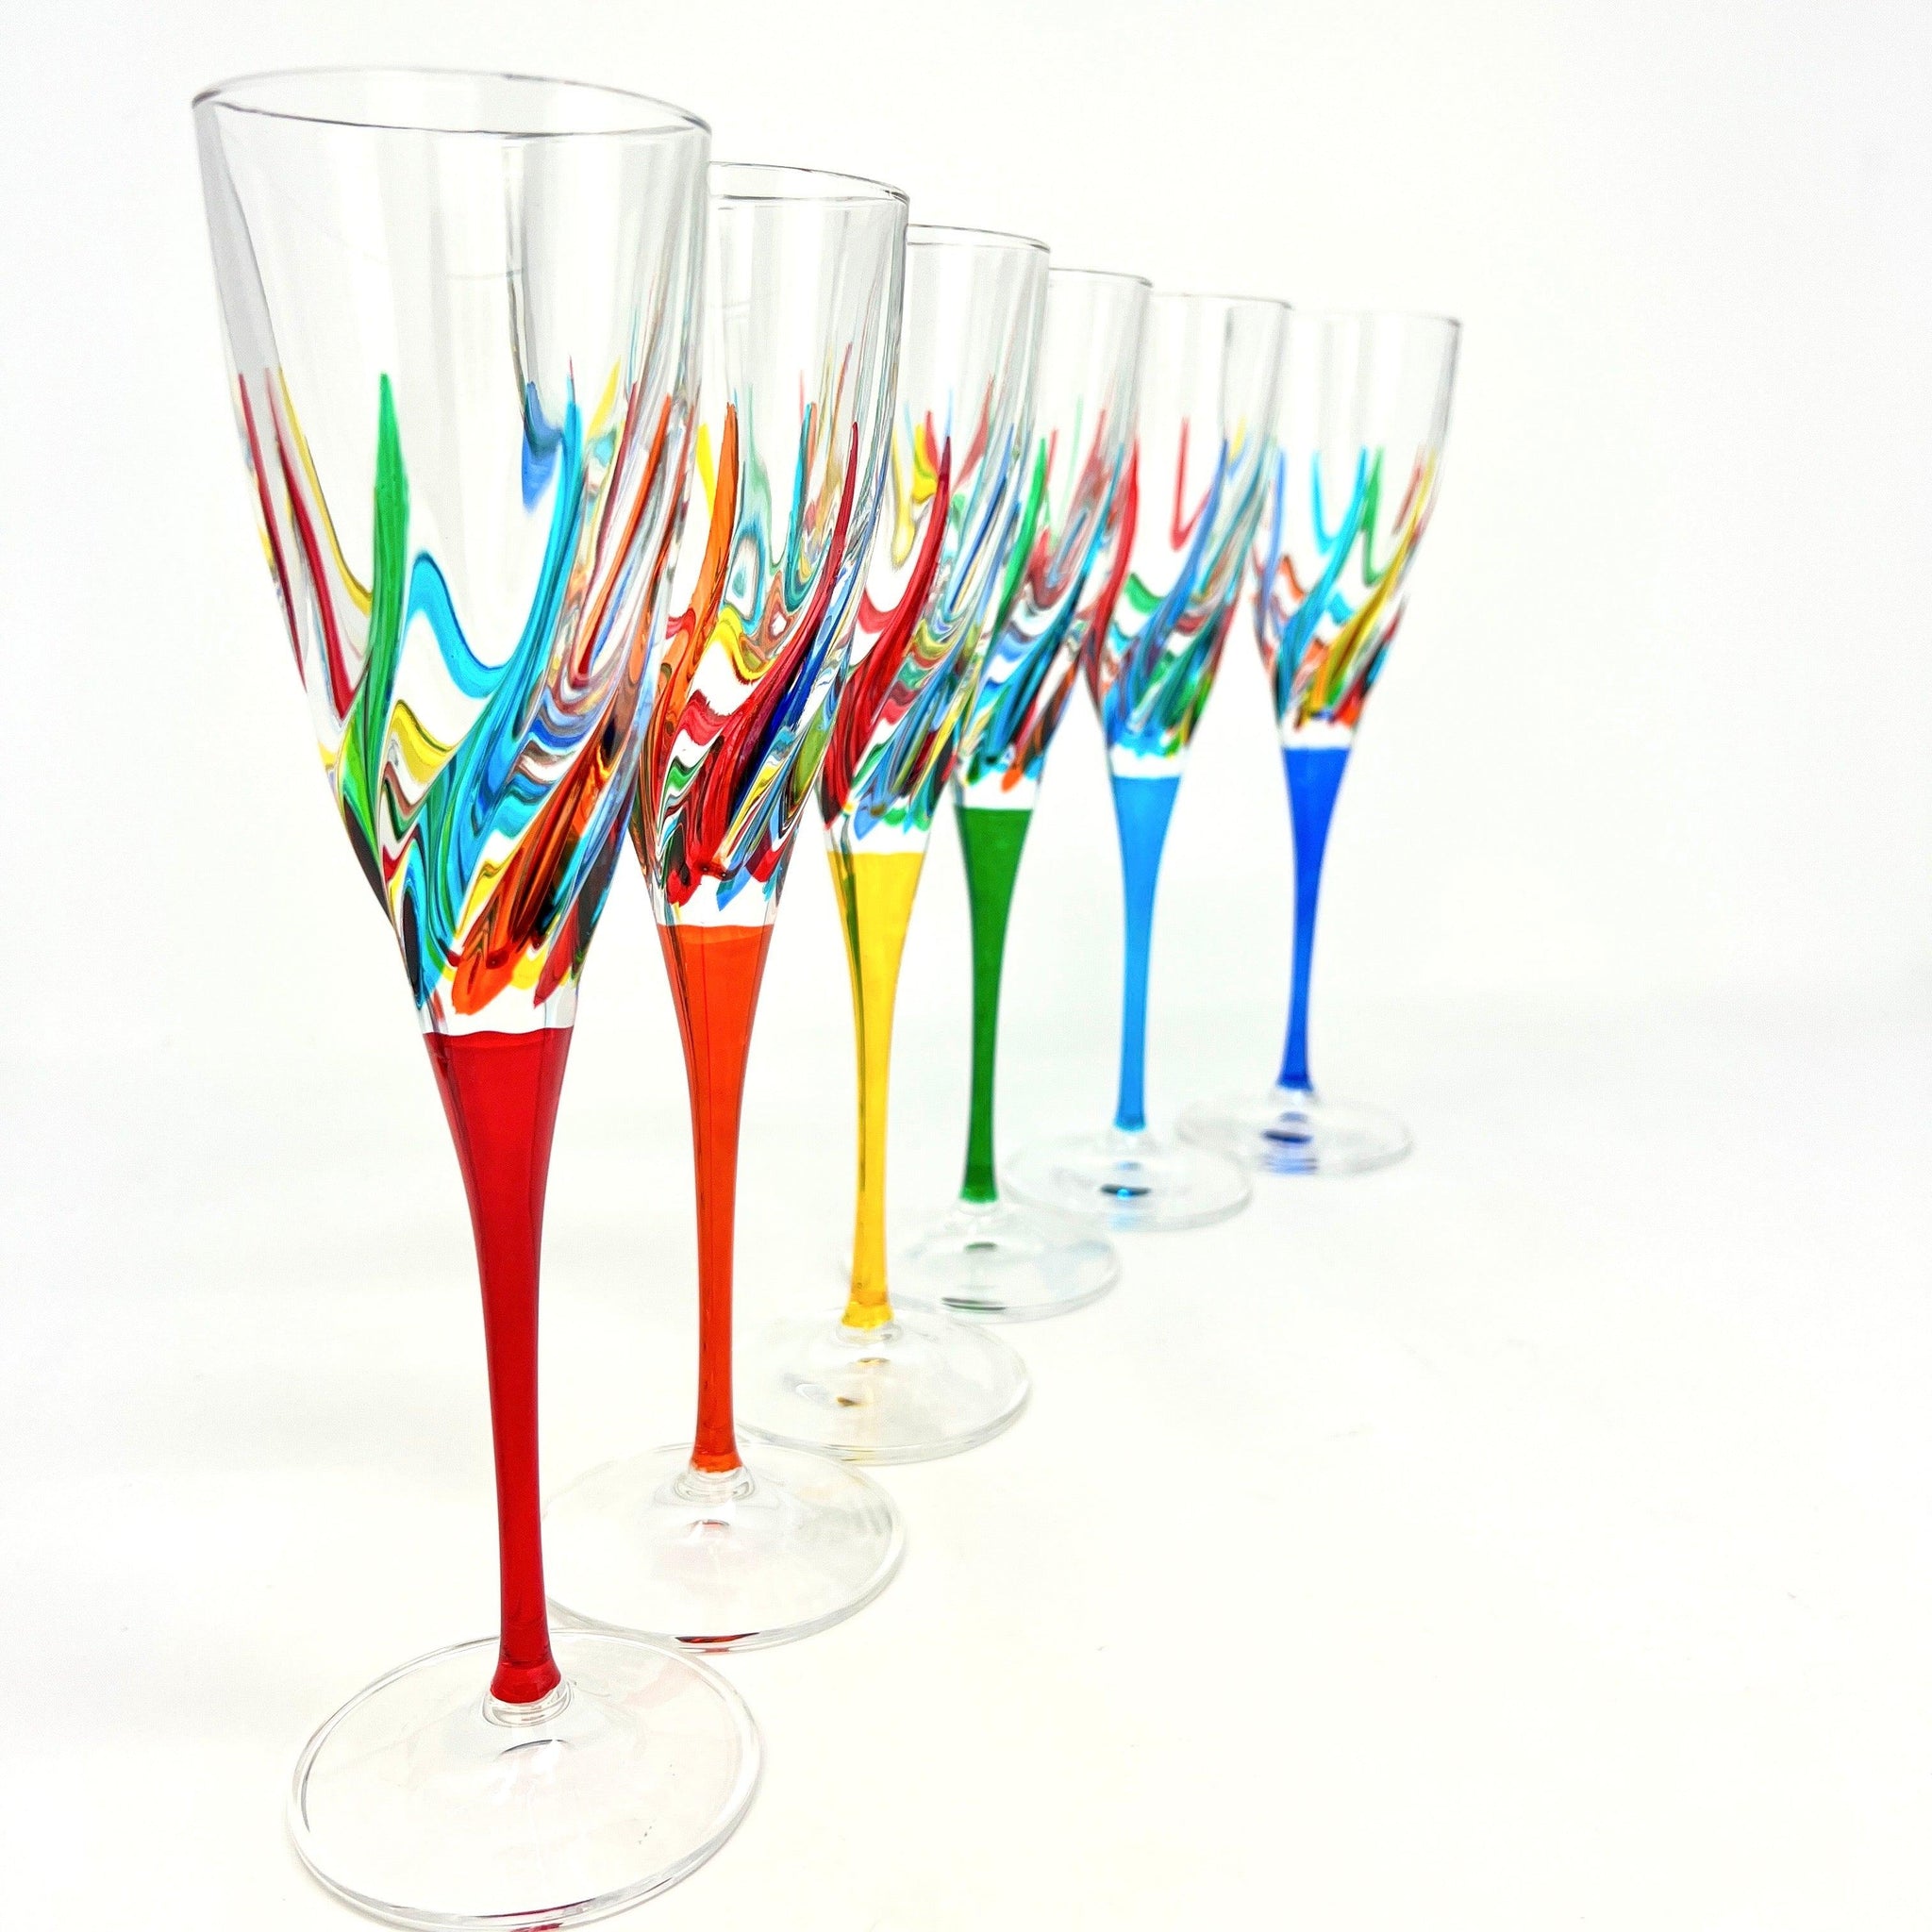 Timeless Champagne Glasses, Set of 2, Hand-Painted Italian Crystal